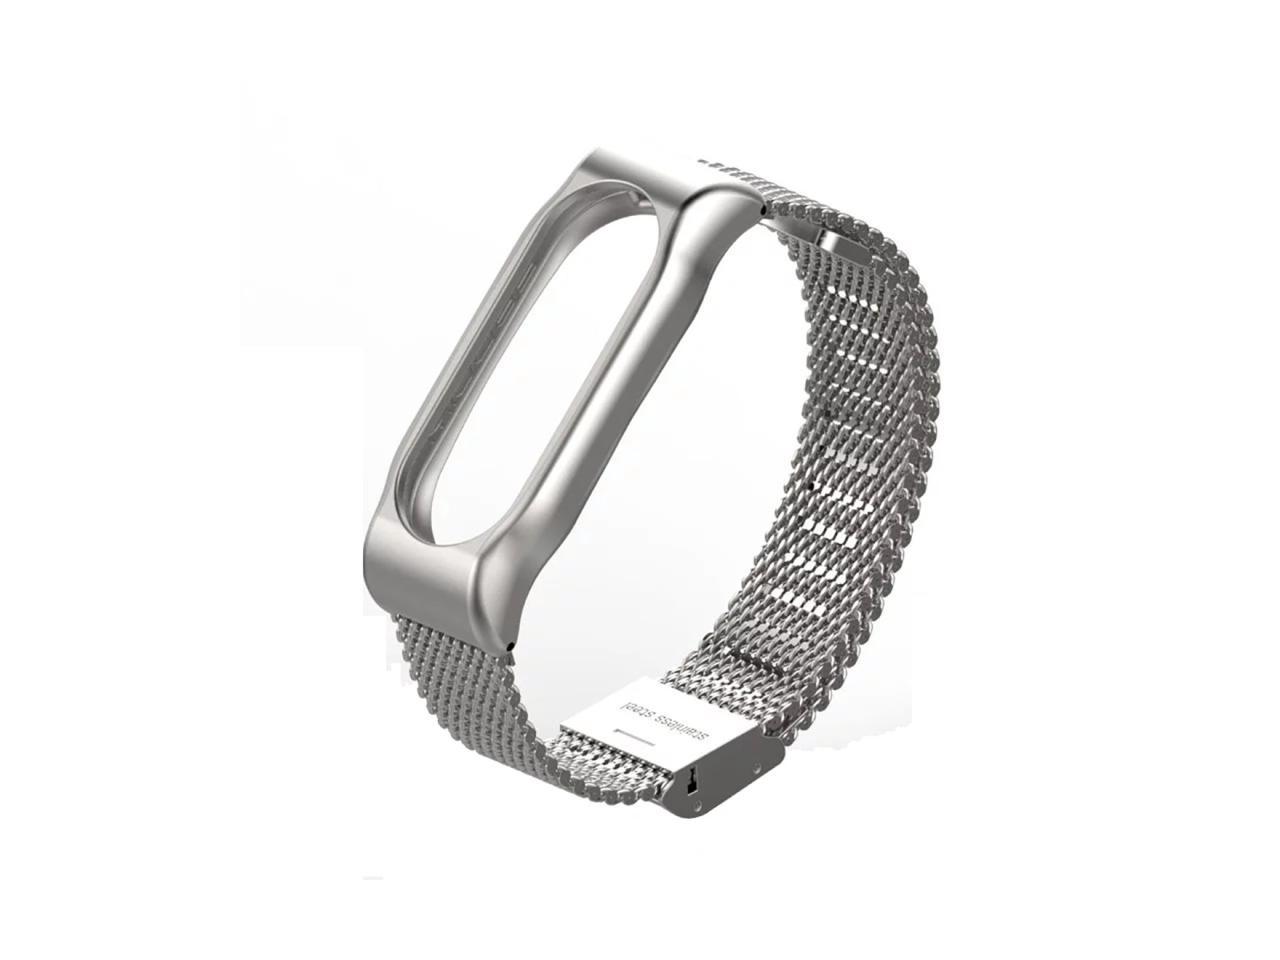 Original Mijobs Metal Strap for Xiaomi Mi Band 2 Screwless Buckle Style Stainless Steel Bracelet Wristbands Replace Accessories, Host not Included